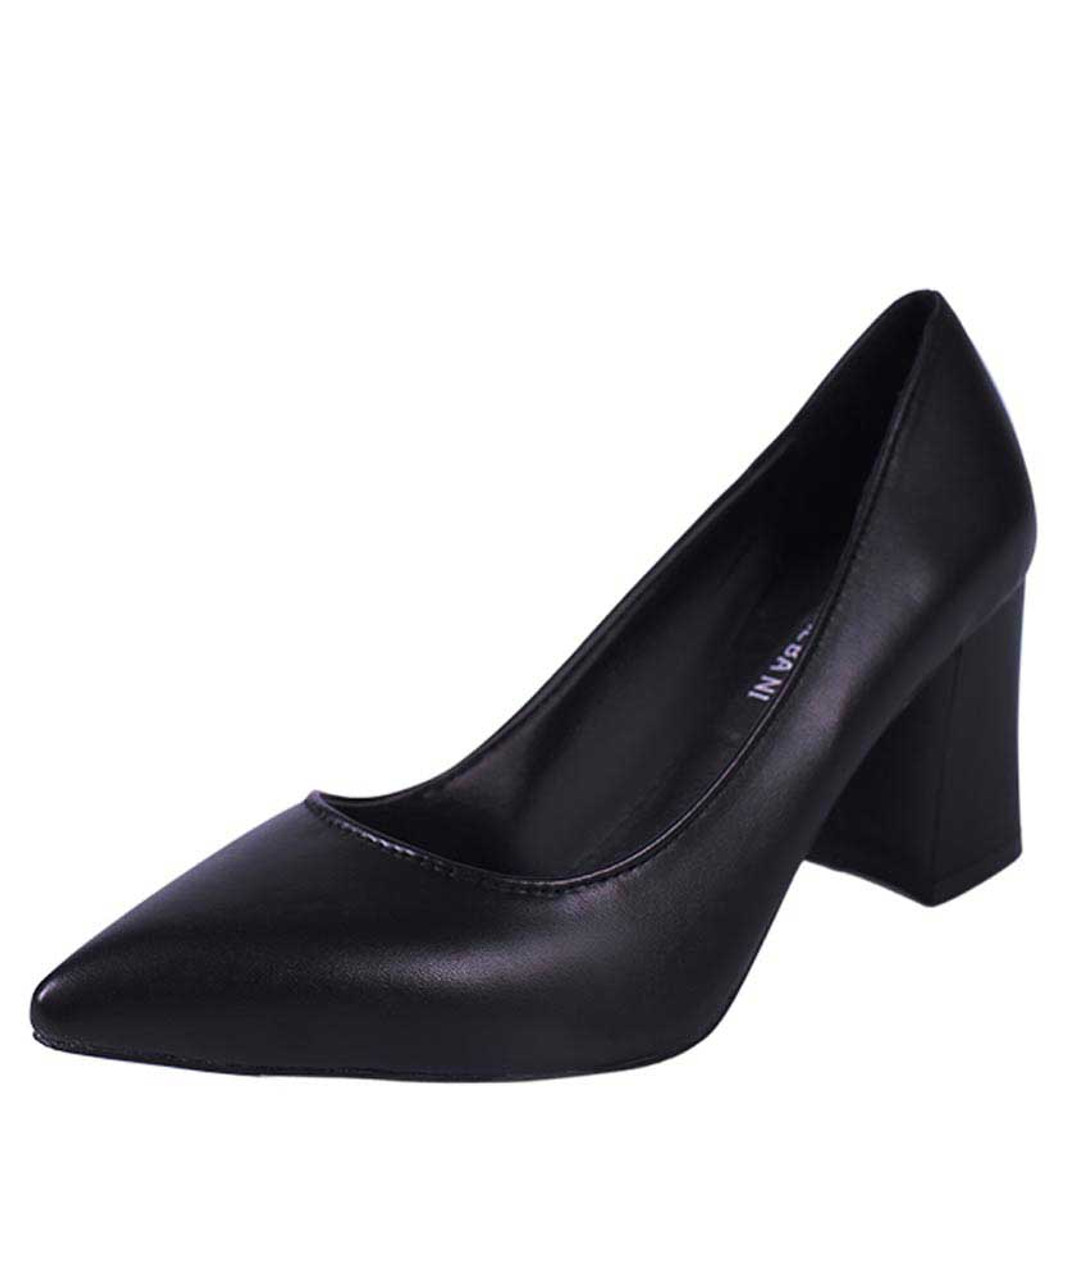 Black Guess Womens Heels South Africa - Guess Online Store Sale